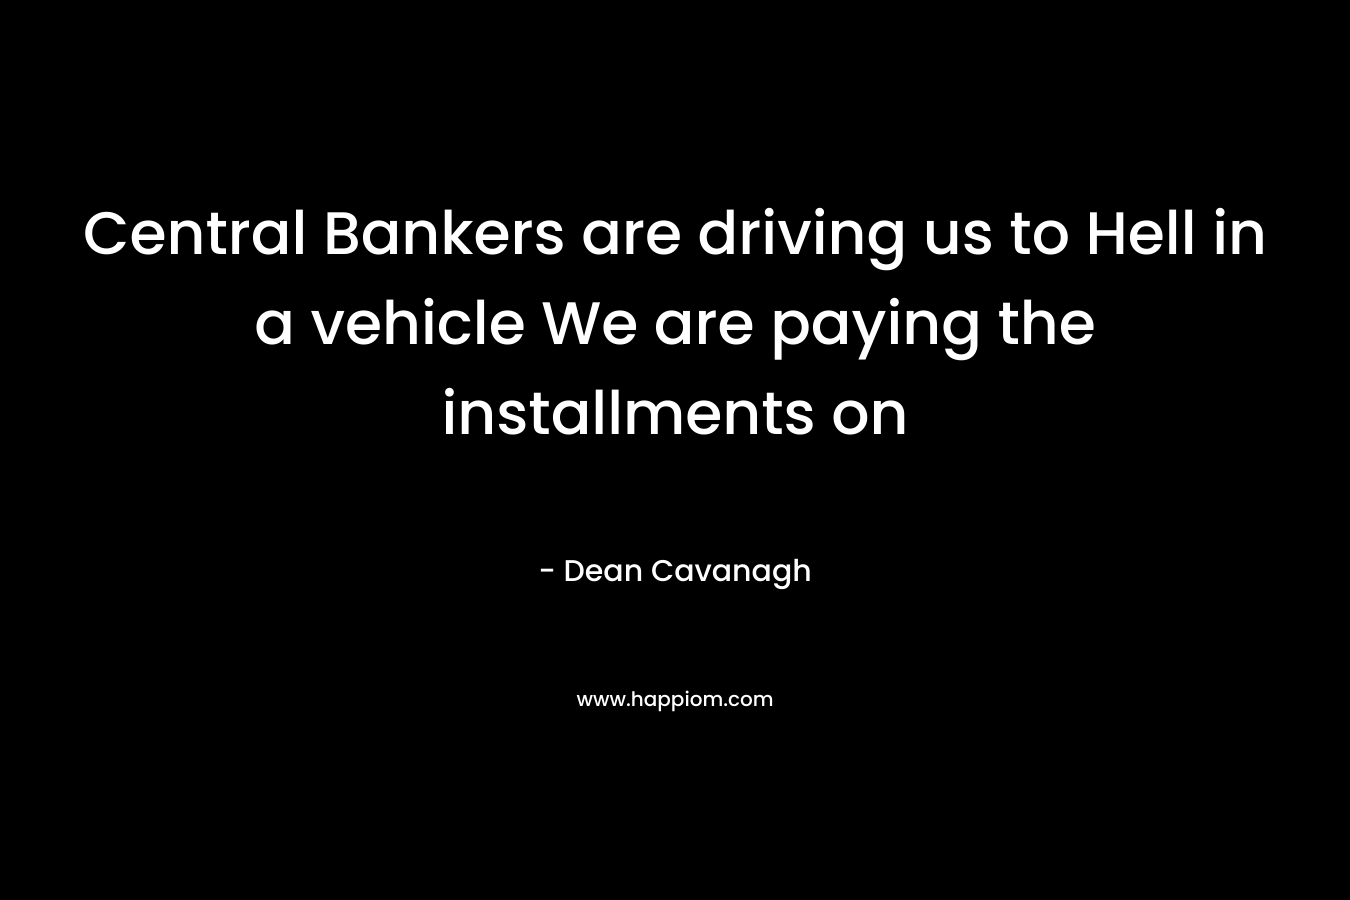 Central Bankers are driving us to Hell in a vehicle We are paying the installments on – Dean Cavanagh